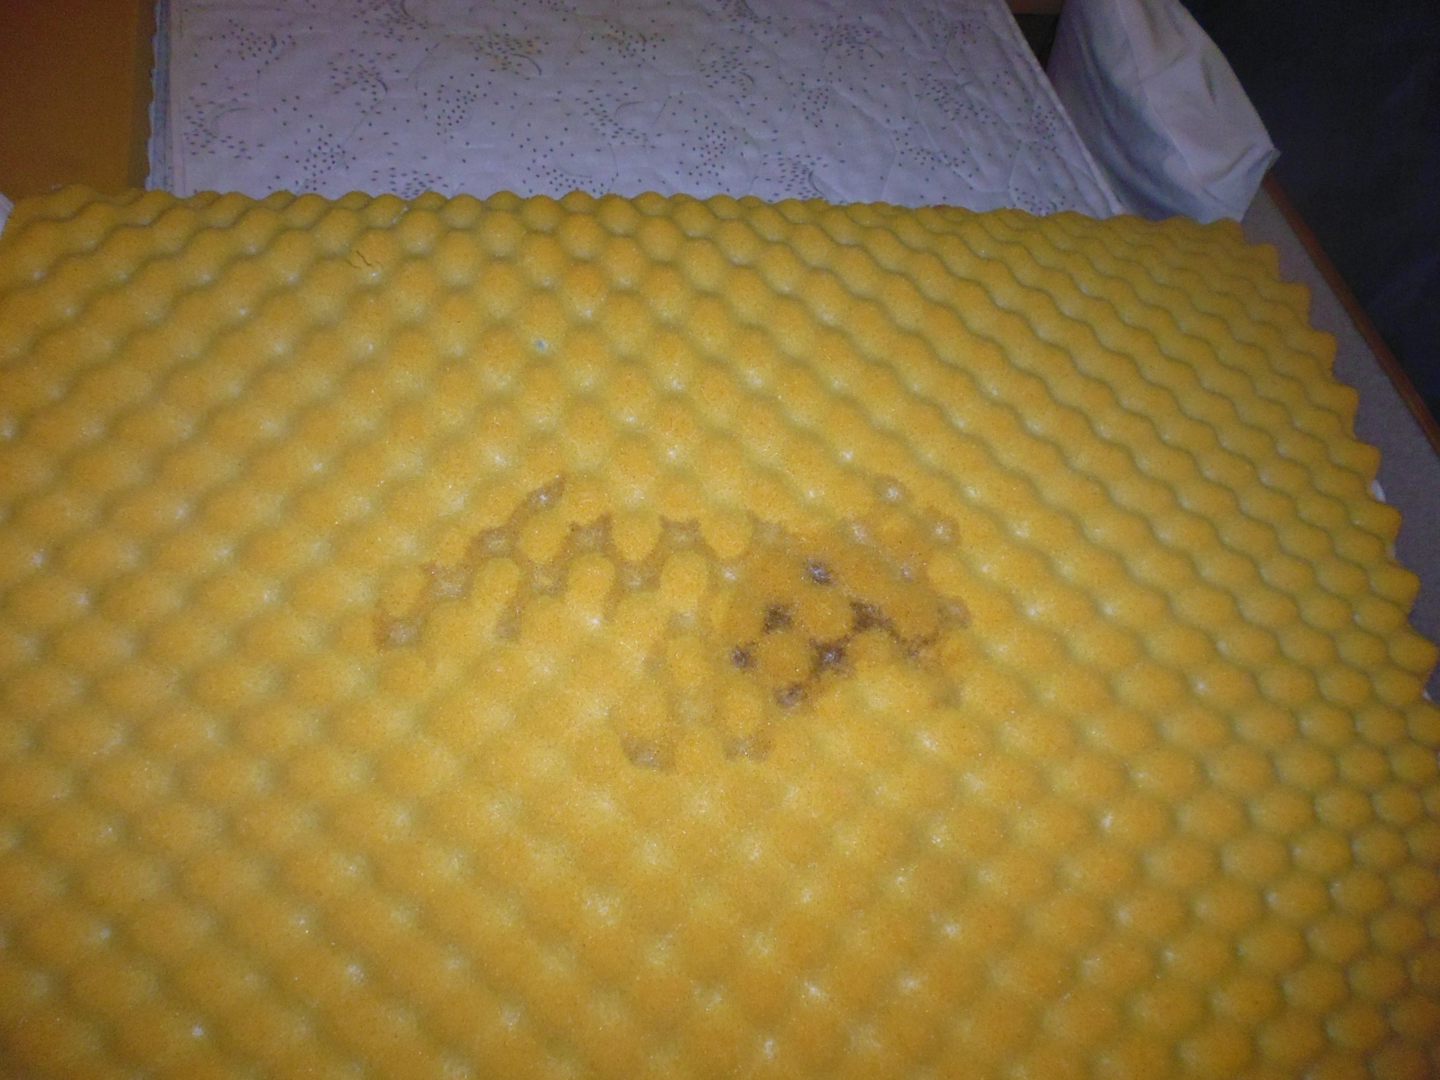 stain on foam mattress which was the cause of the offensive smell in the room